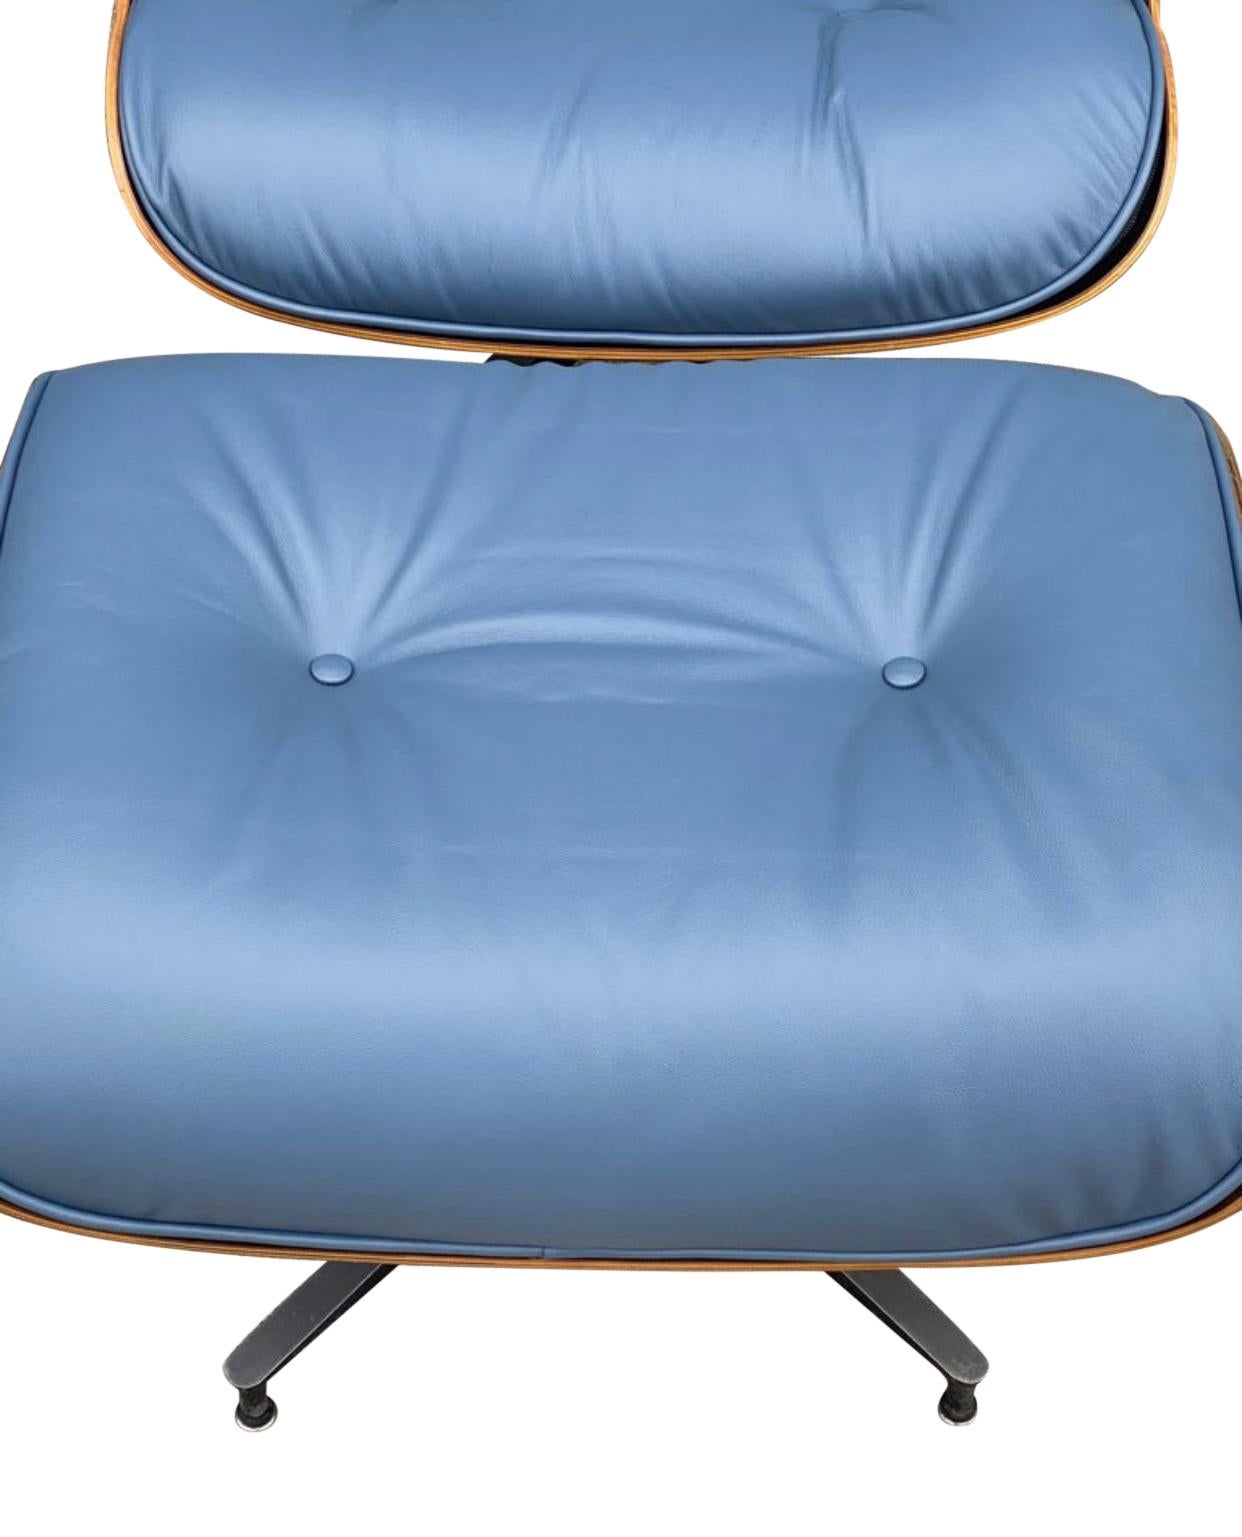 Rare Custom Herman Miller Eames Lounge Chair & Ottoman with Perfect Blue Leather 1